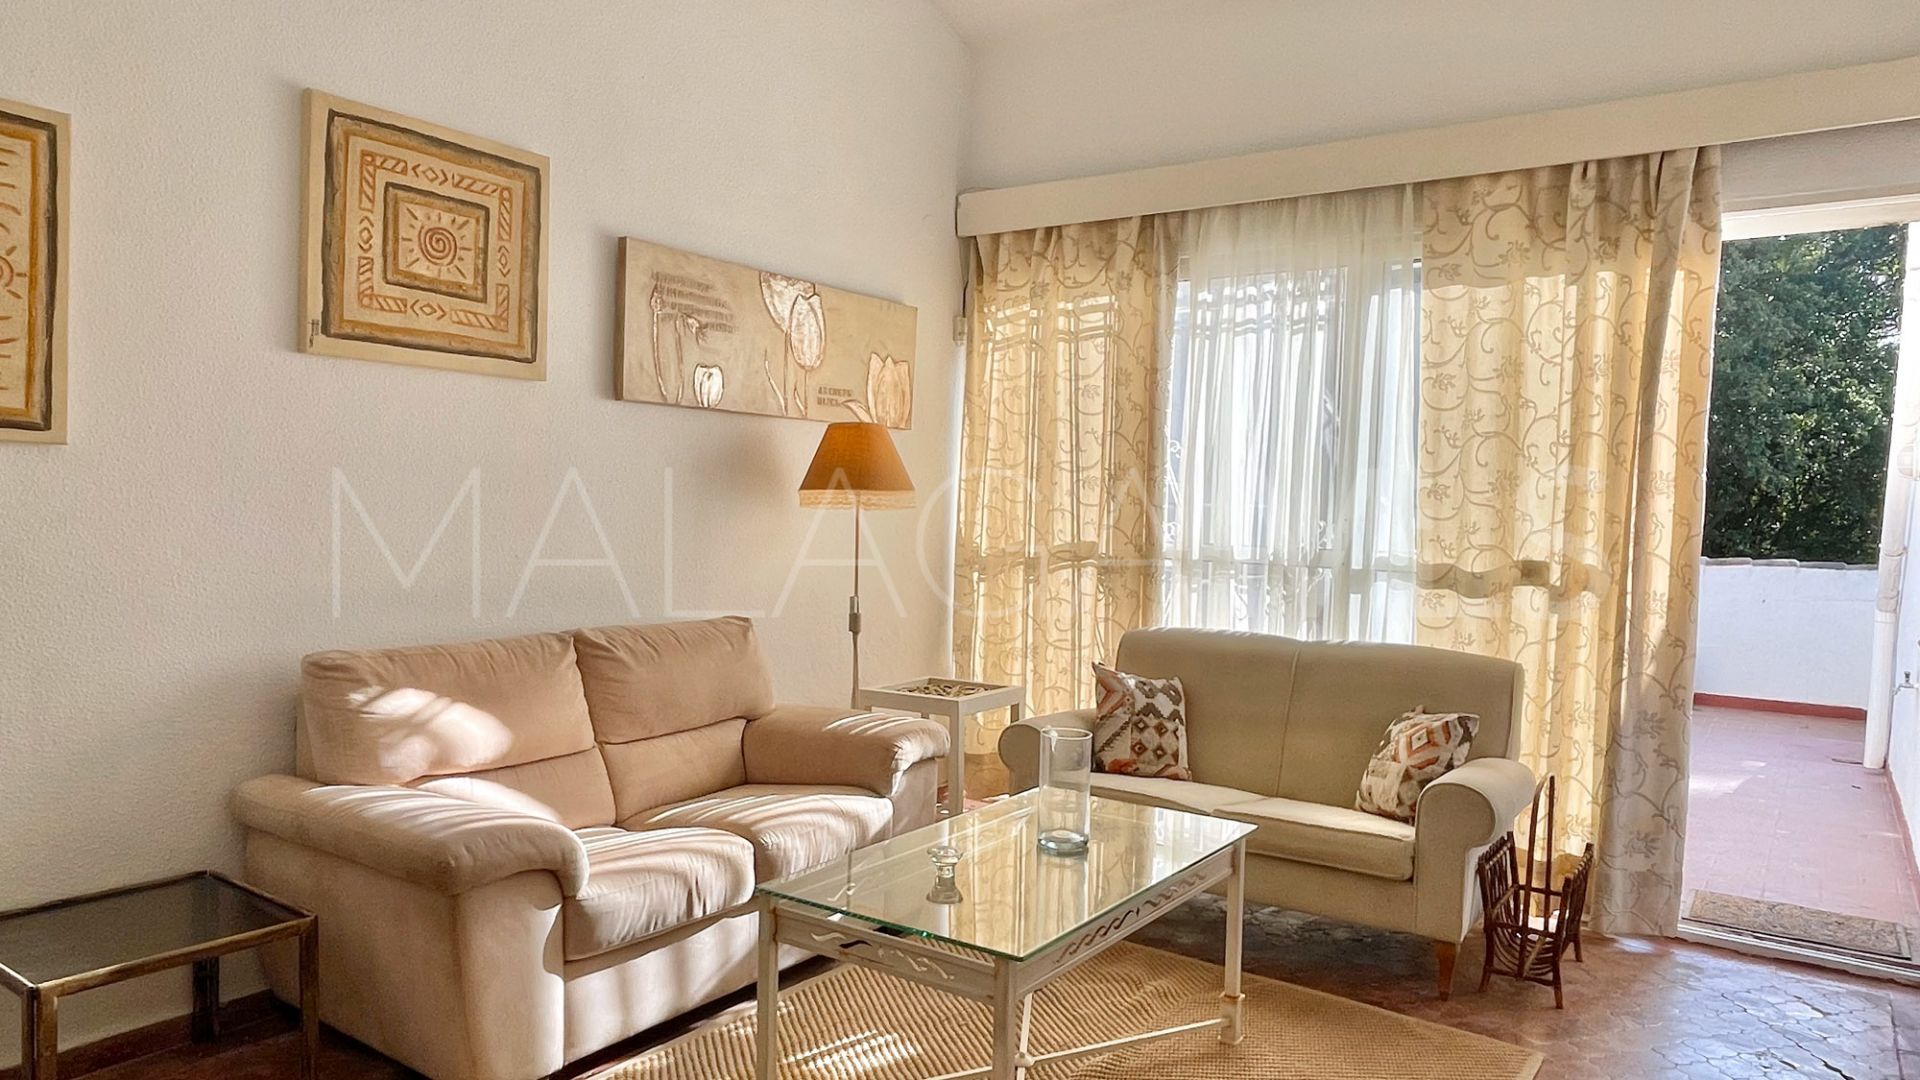 Penthouse in Nueva Andalucia for sale